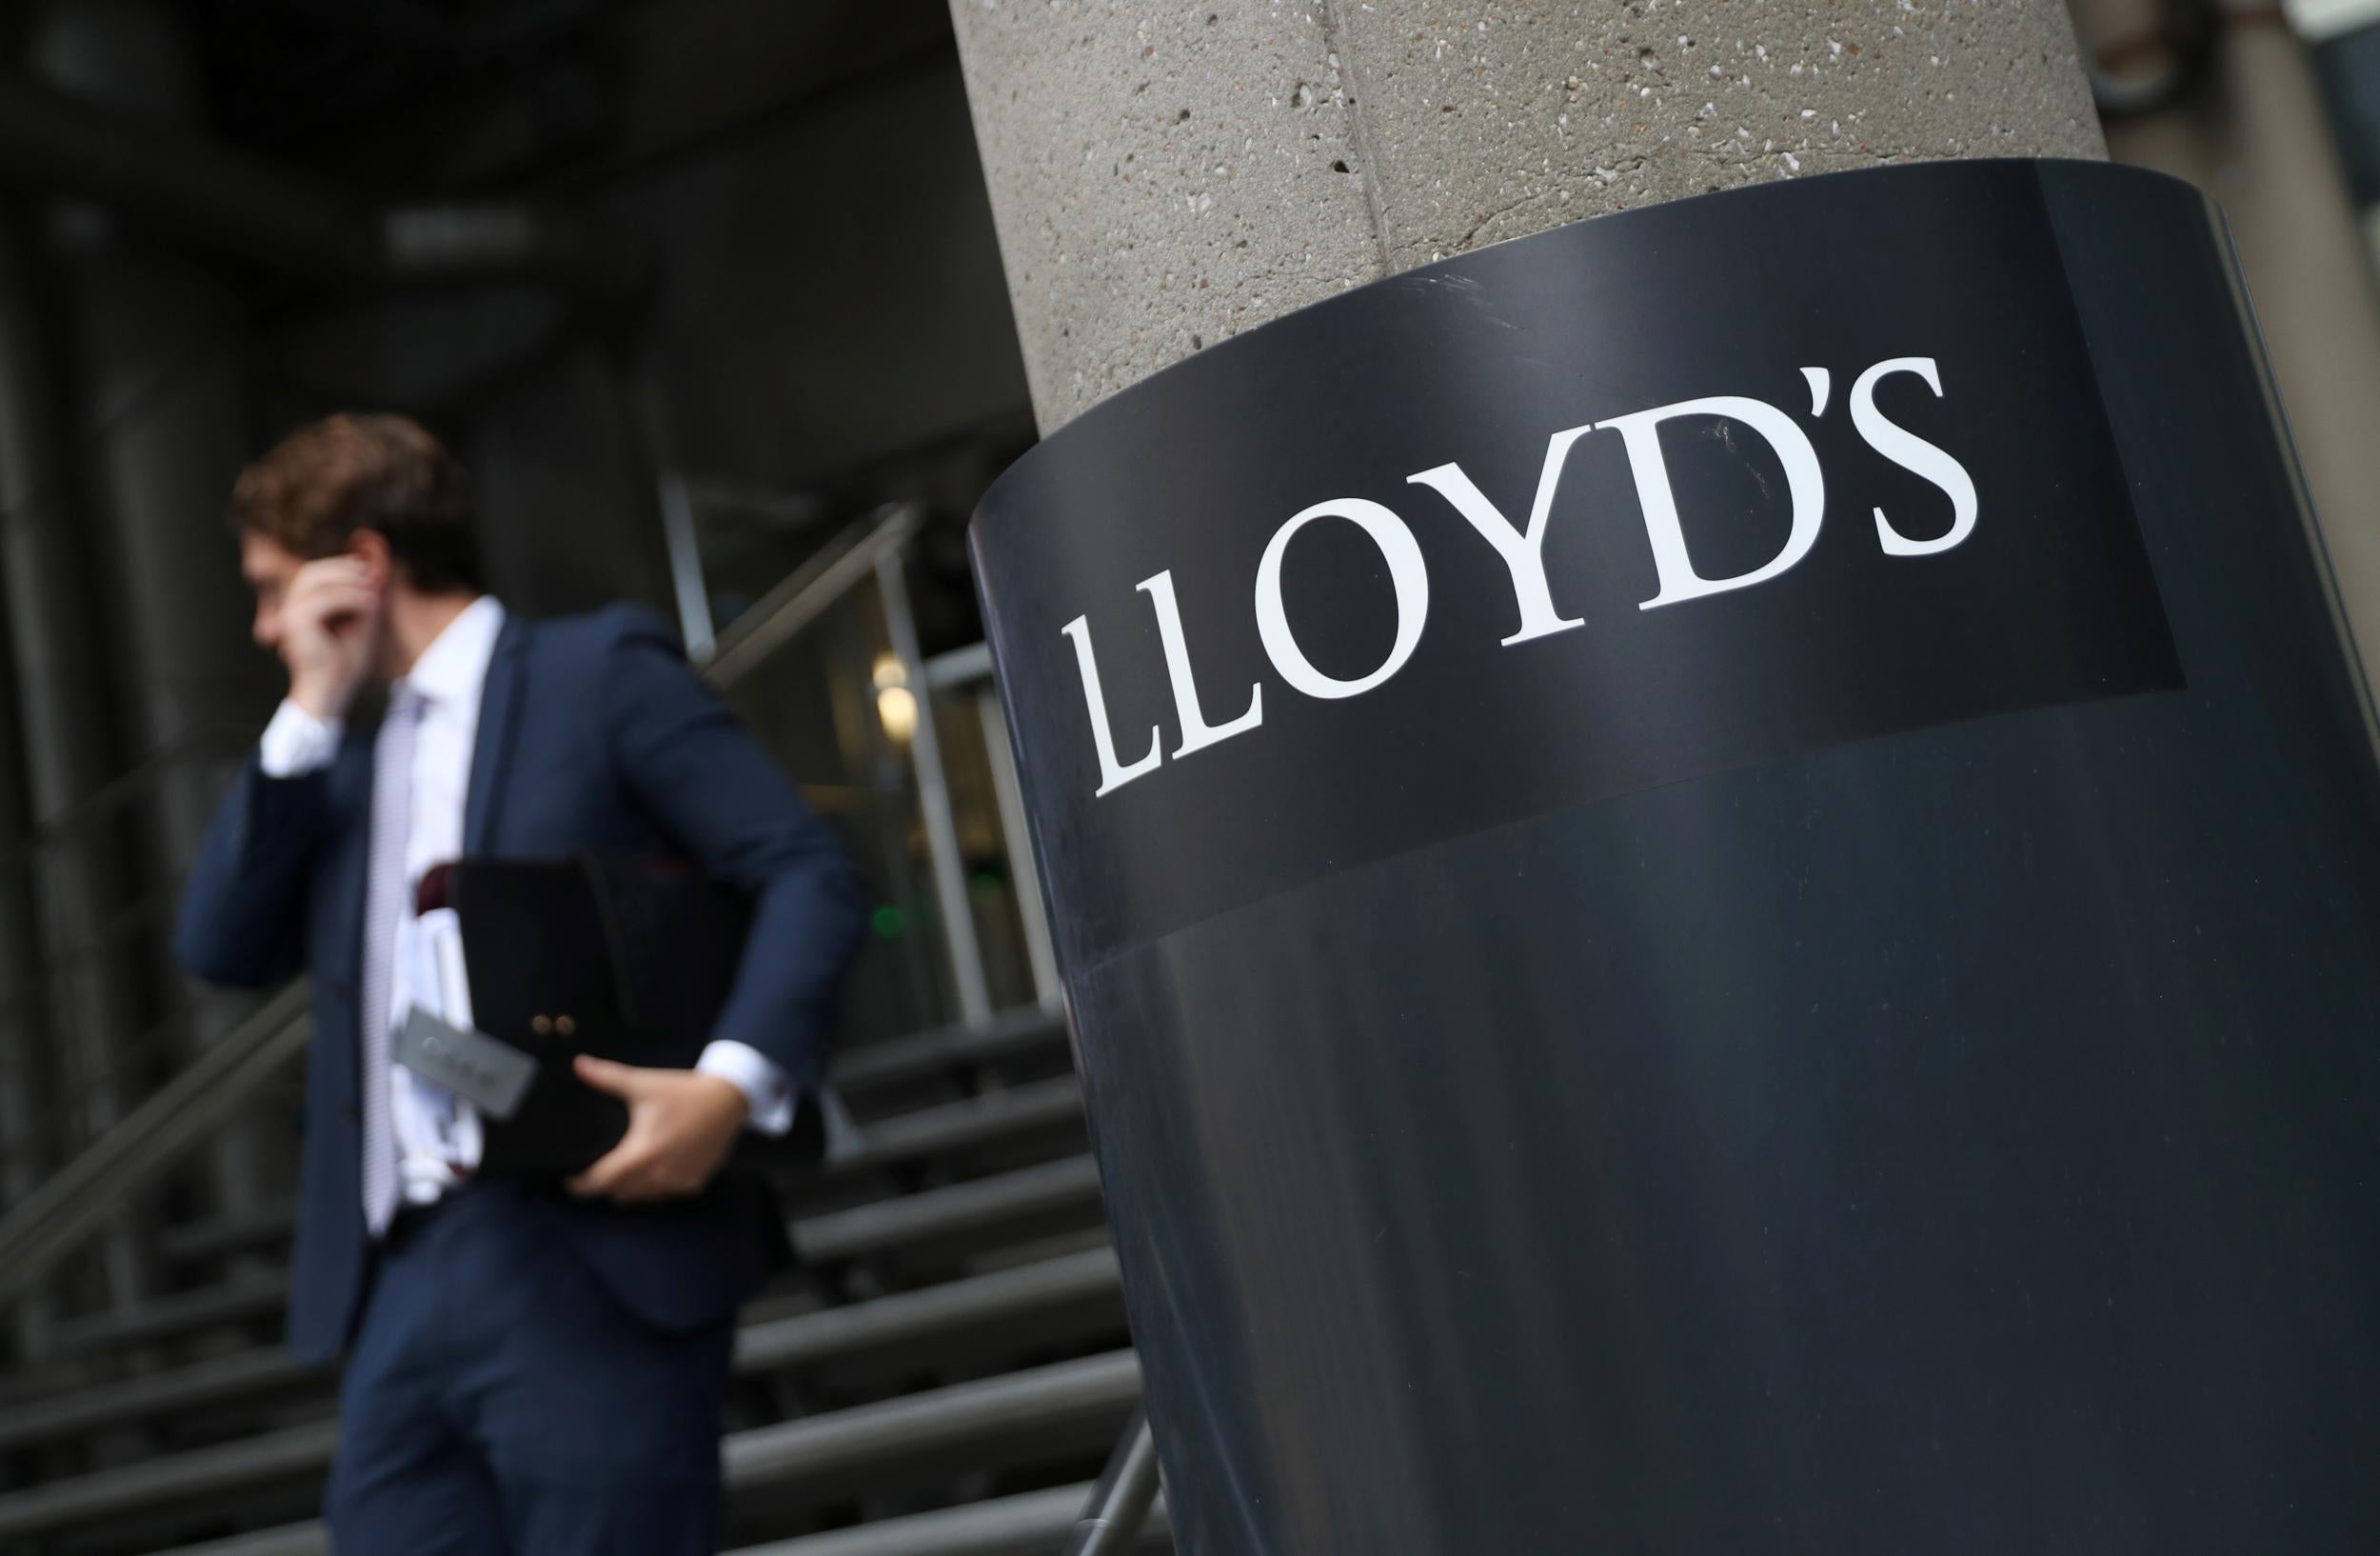 Lloyd’s of London: The famous insurance market has announced a big loss in the wake of a sexism scandal